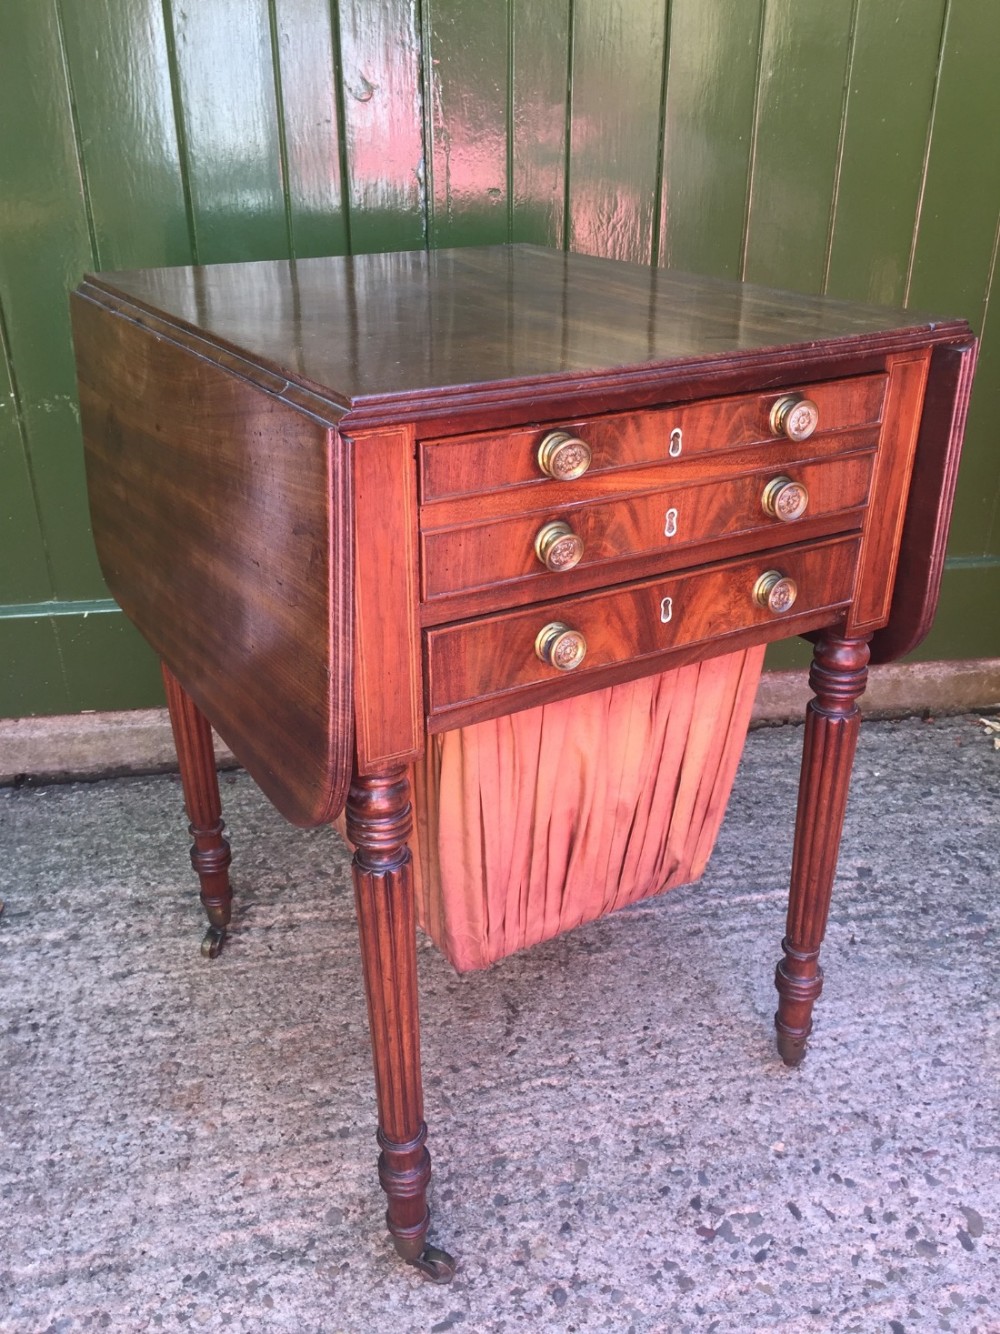 early c19th regency period mahogany dropleaf pembroke sewing table with fitted writing drawer in the manner of gillows of lancaster